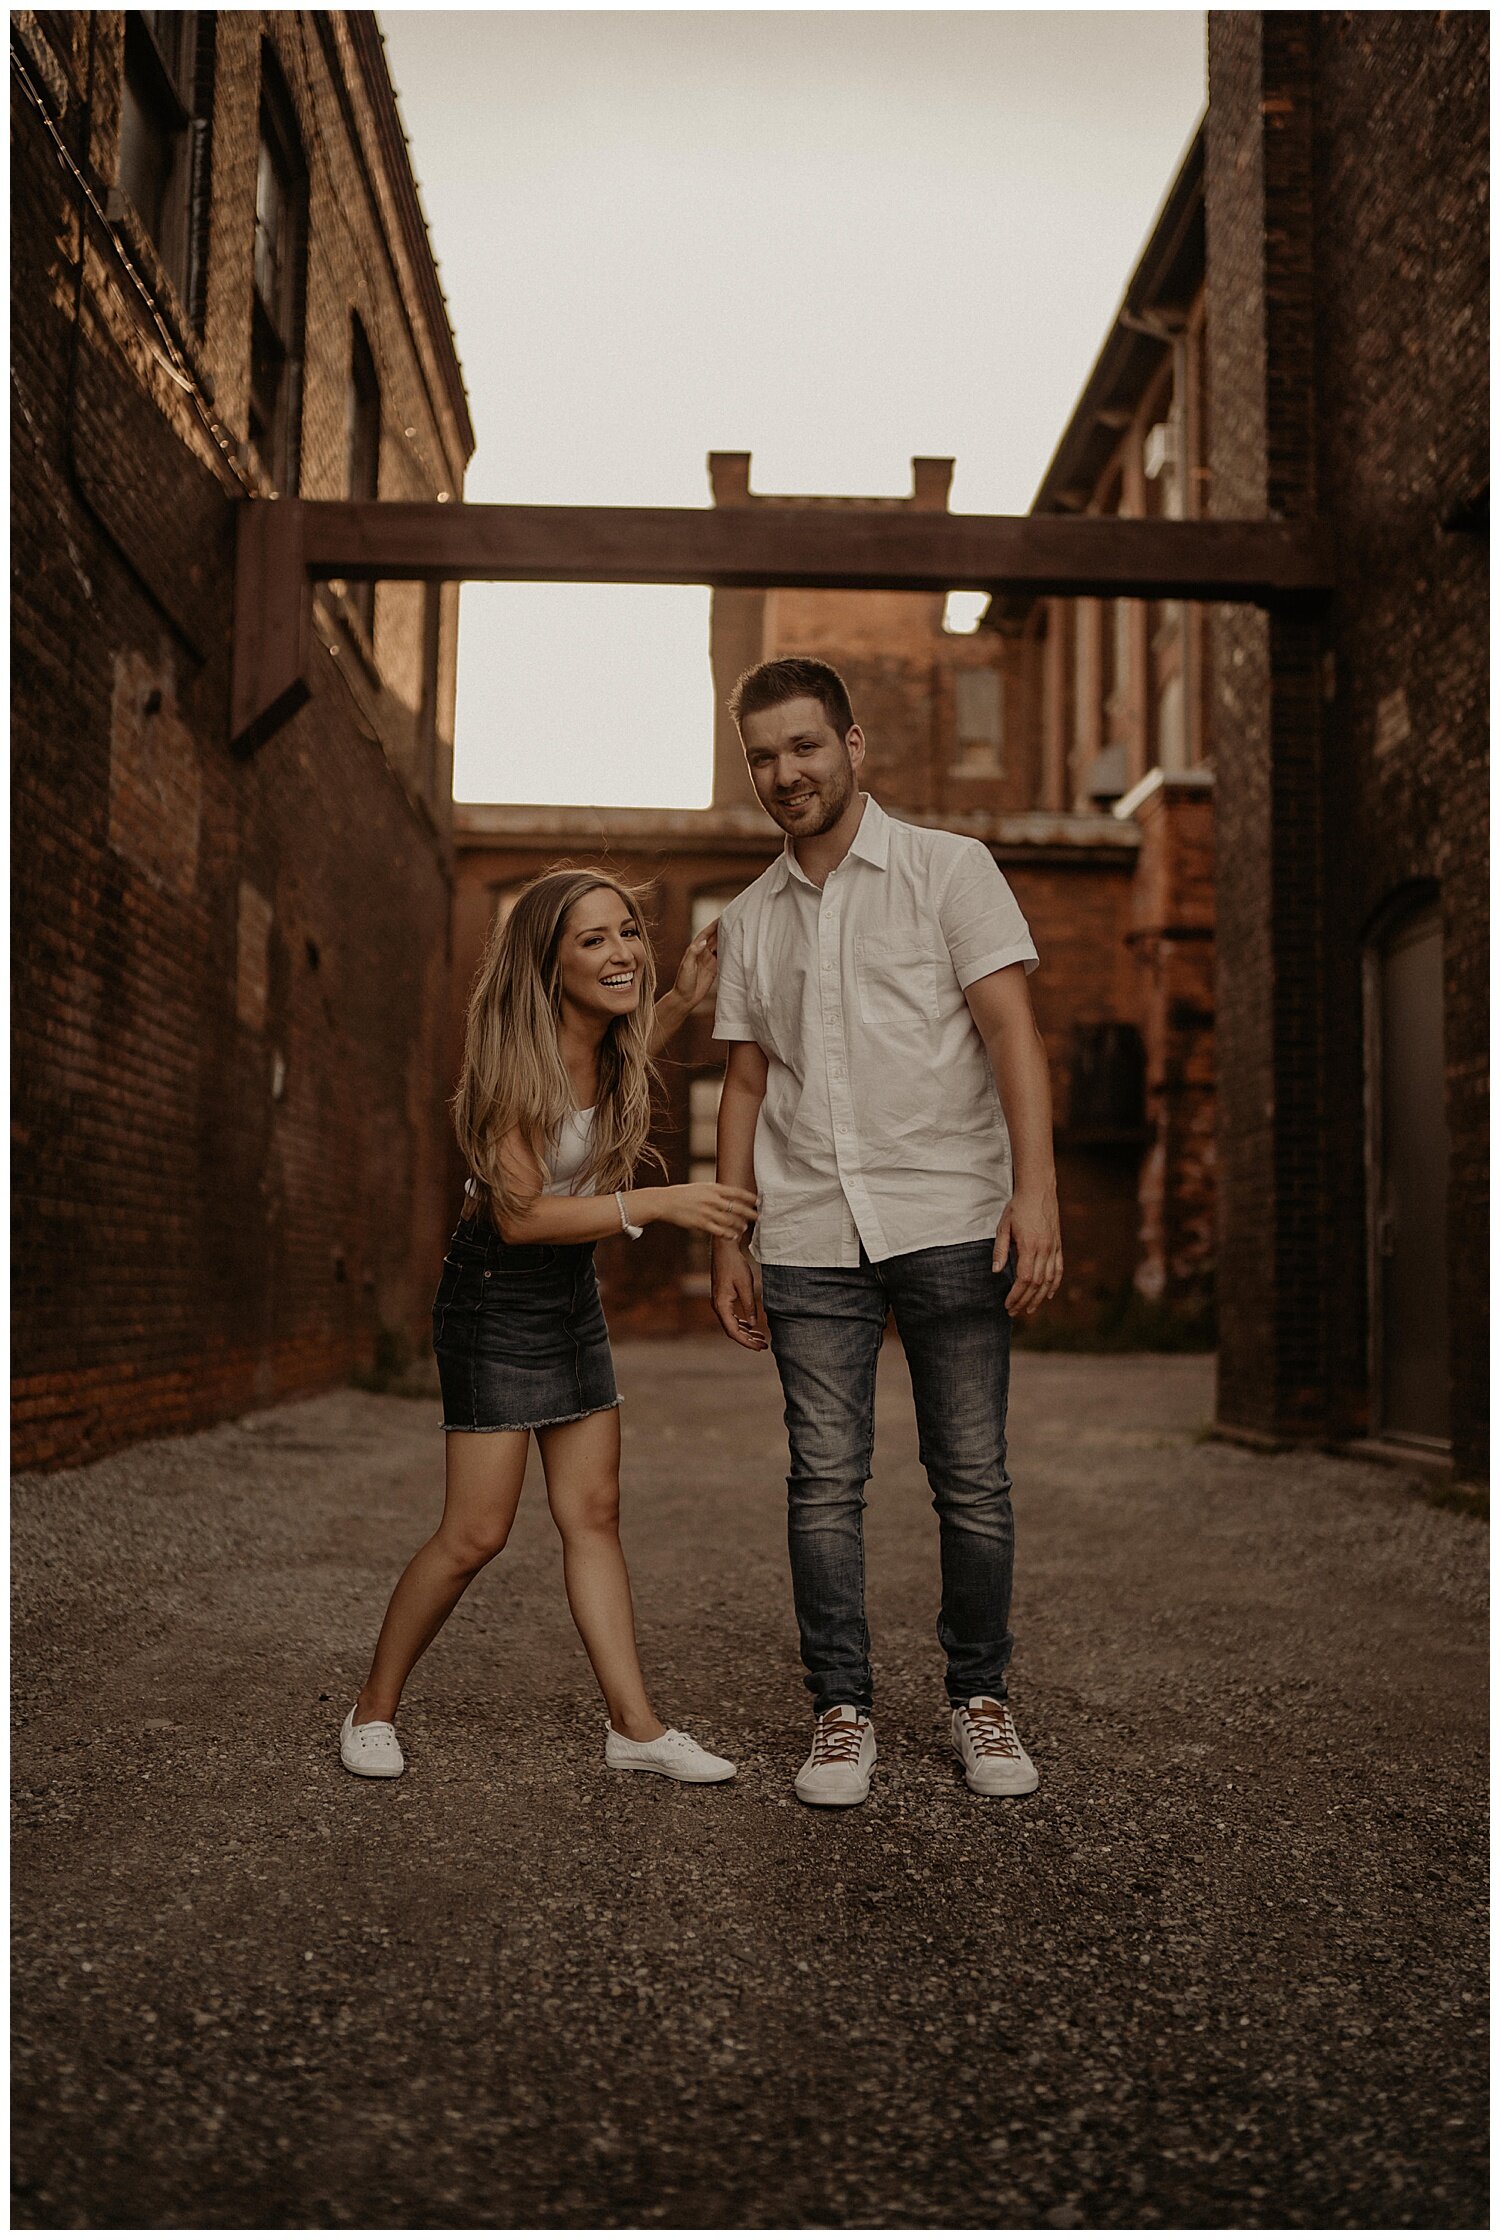 Cotton_Factory_And_Waterfall_Engagement_Session_Hamilton_Ontario_Wedding_Photographer_0076.jpg